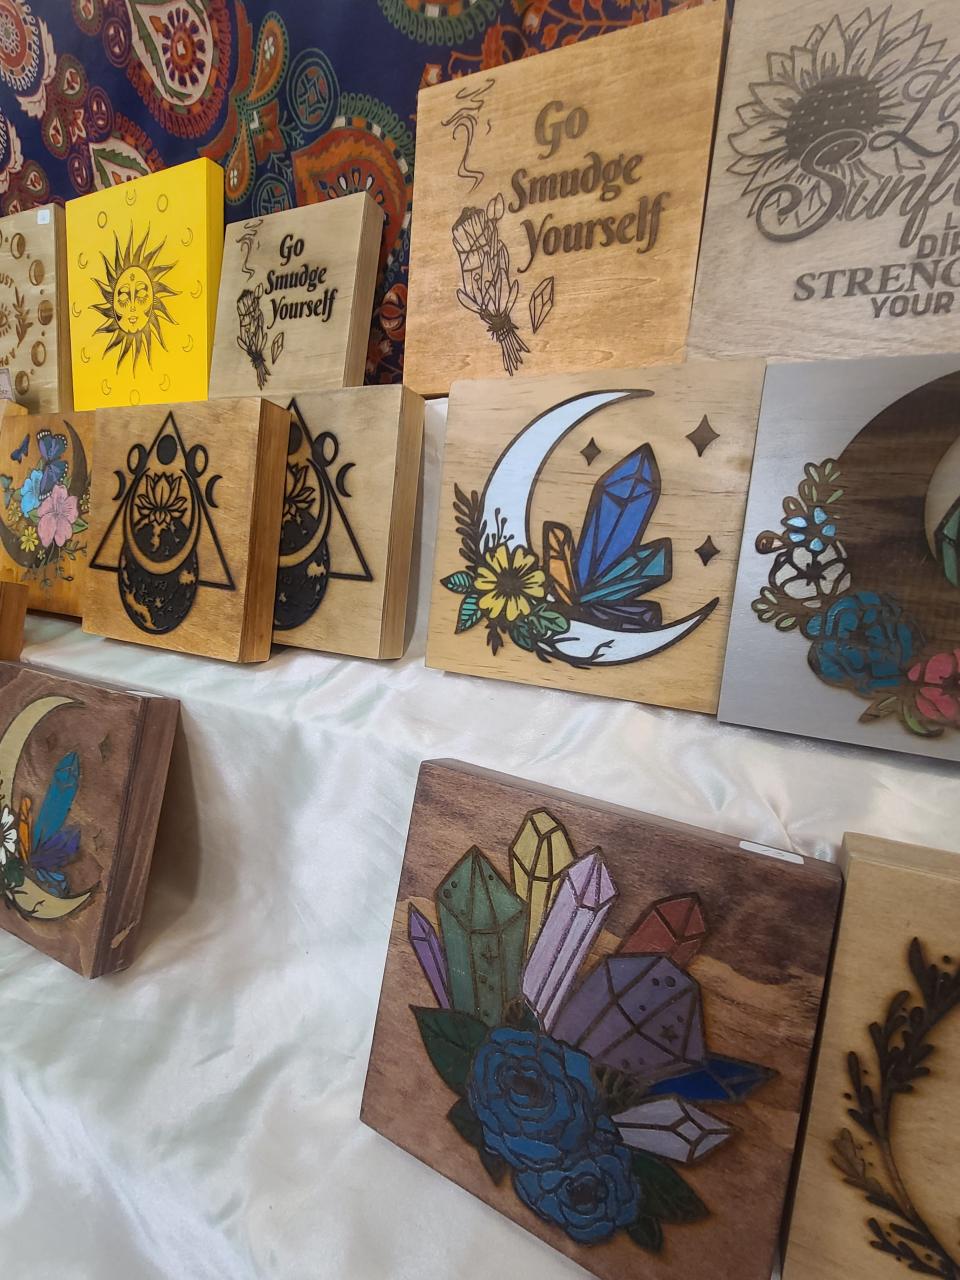 A variety of colorful signs, displaying images crystal, flowers, celestial objects and more, are for sale at Sirona Natural Healing Shop in downtown Clyde.